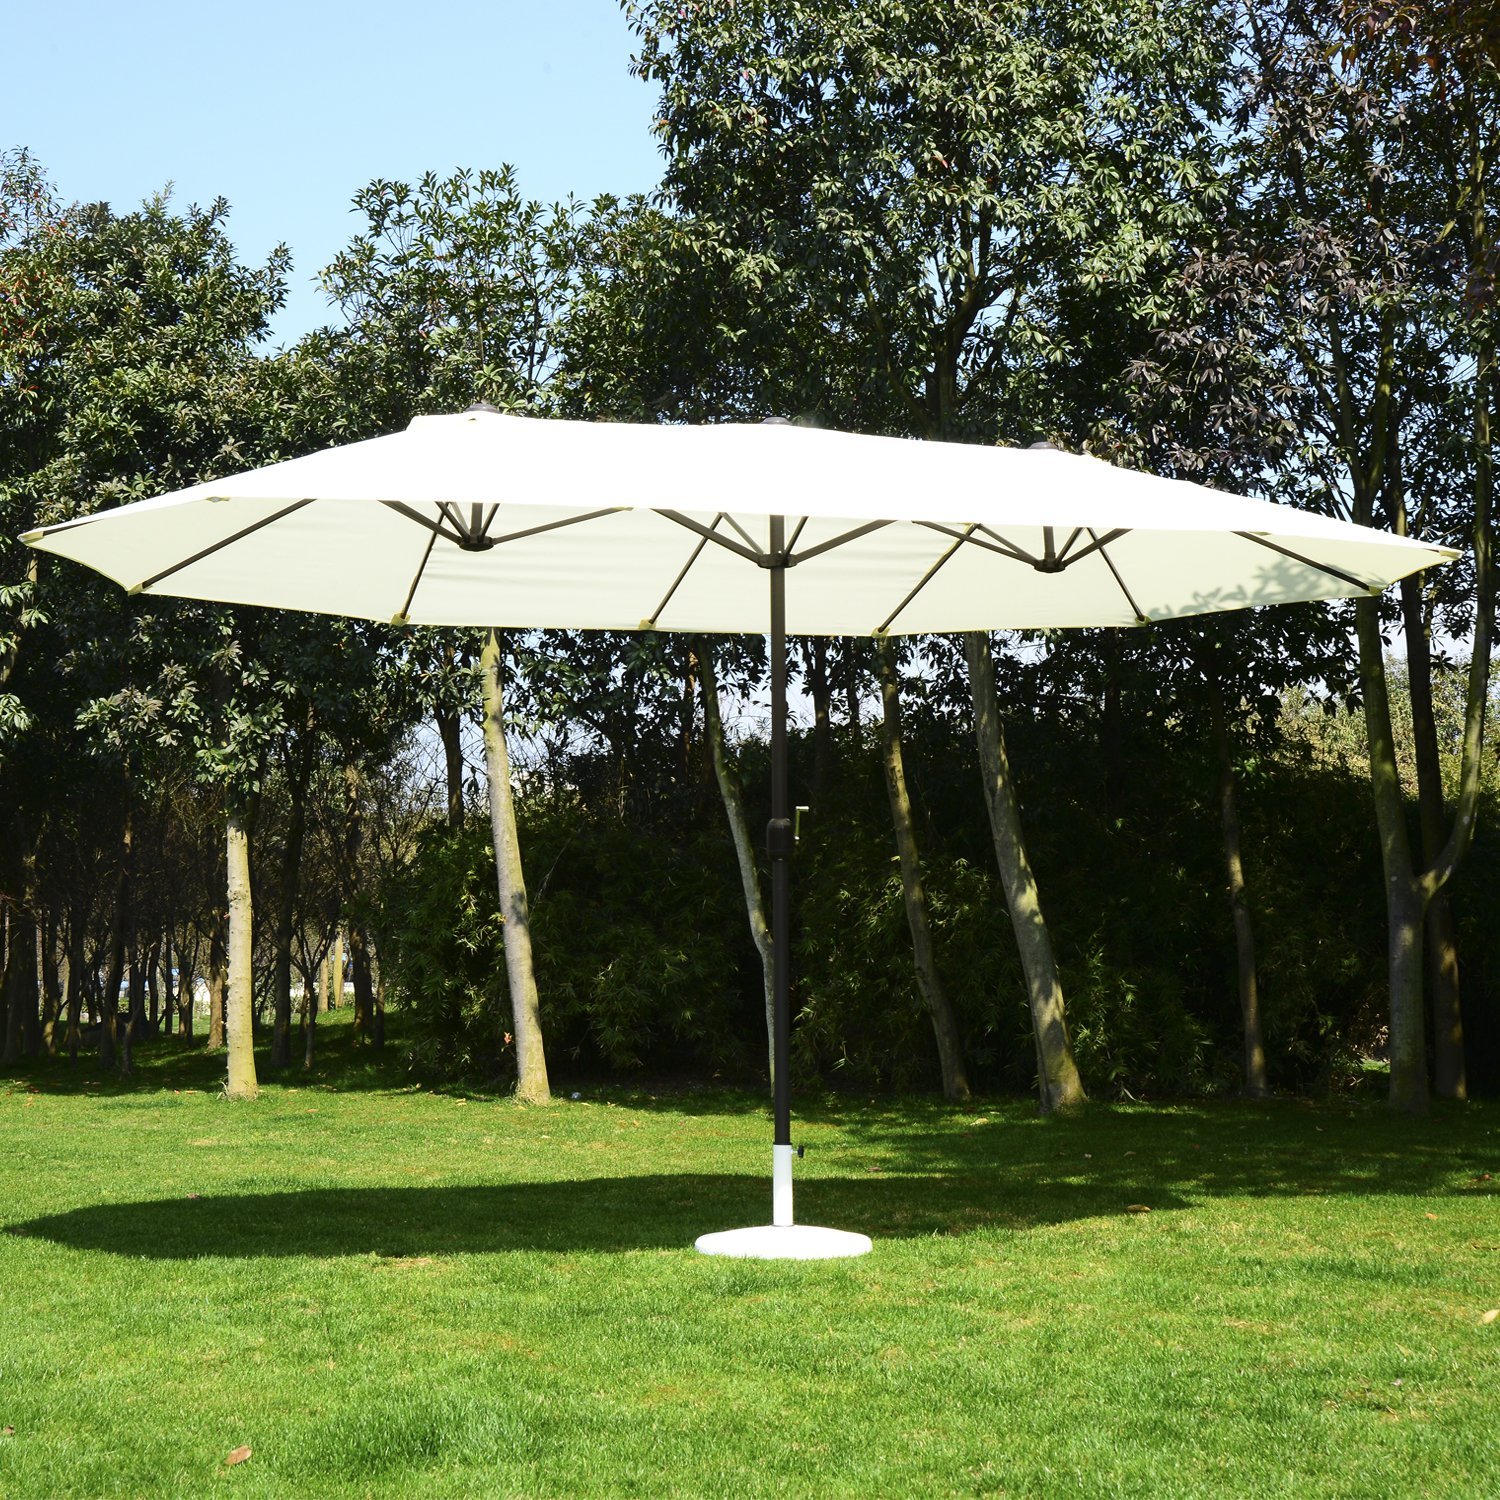 Review of Outsunny 15' Outdoor Patio Market Double-Sided Umbrella - Cream White and Brown